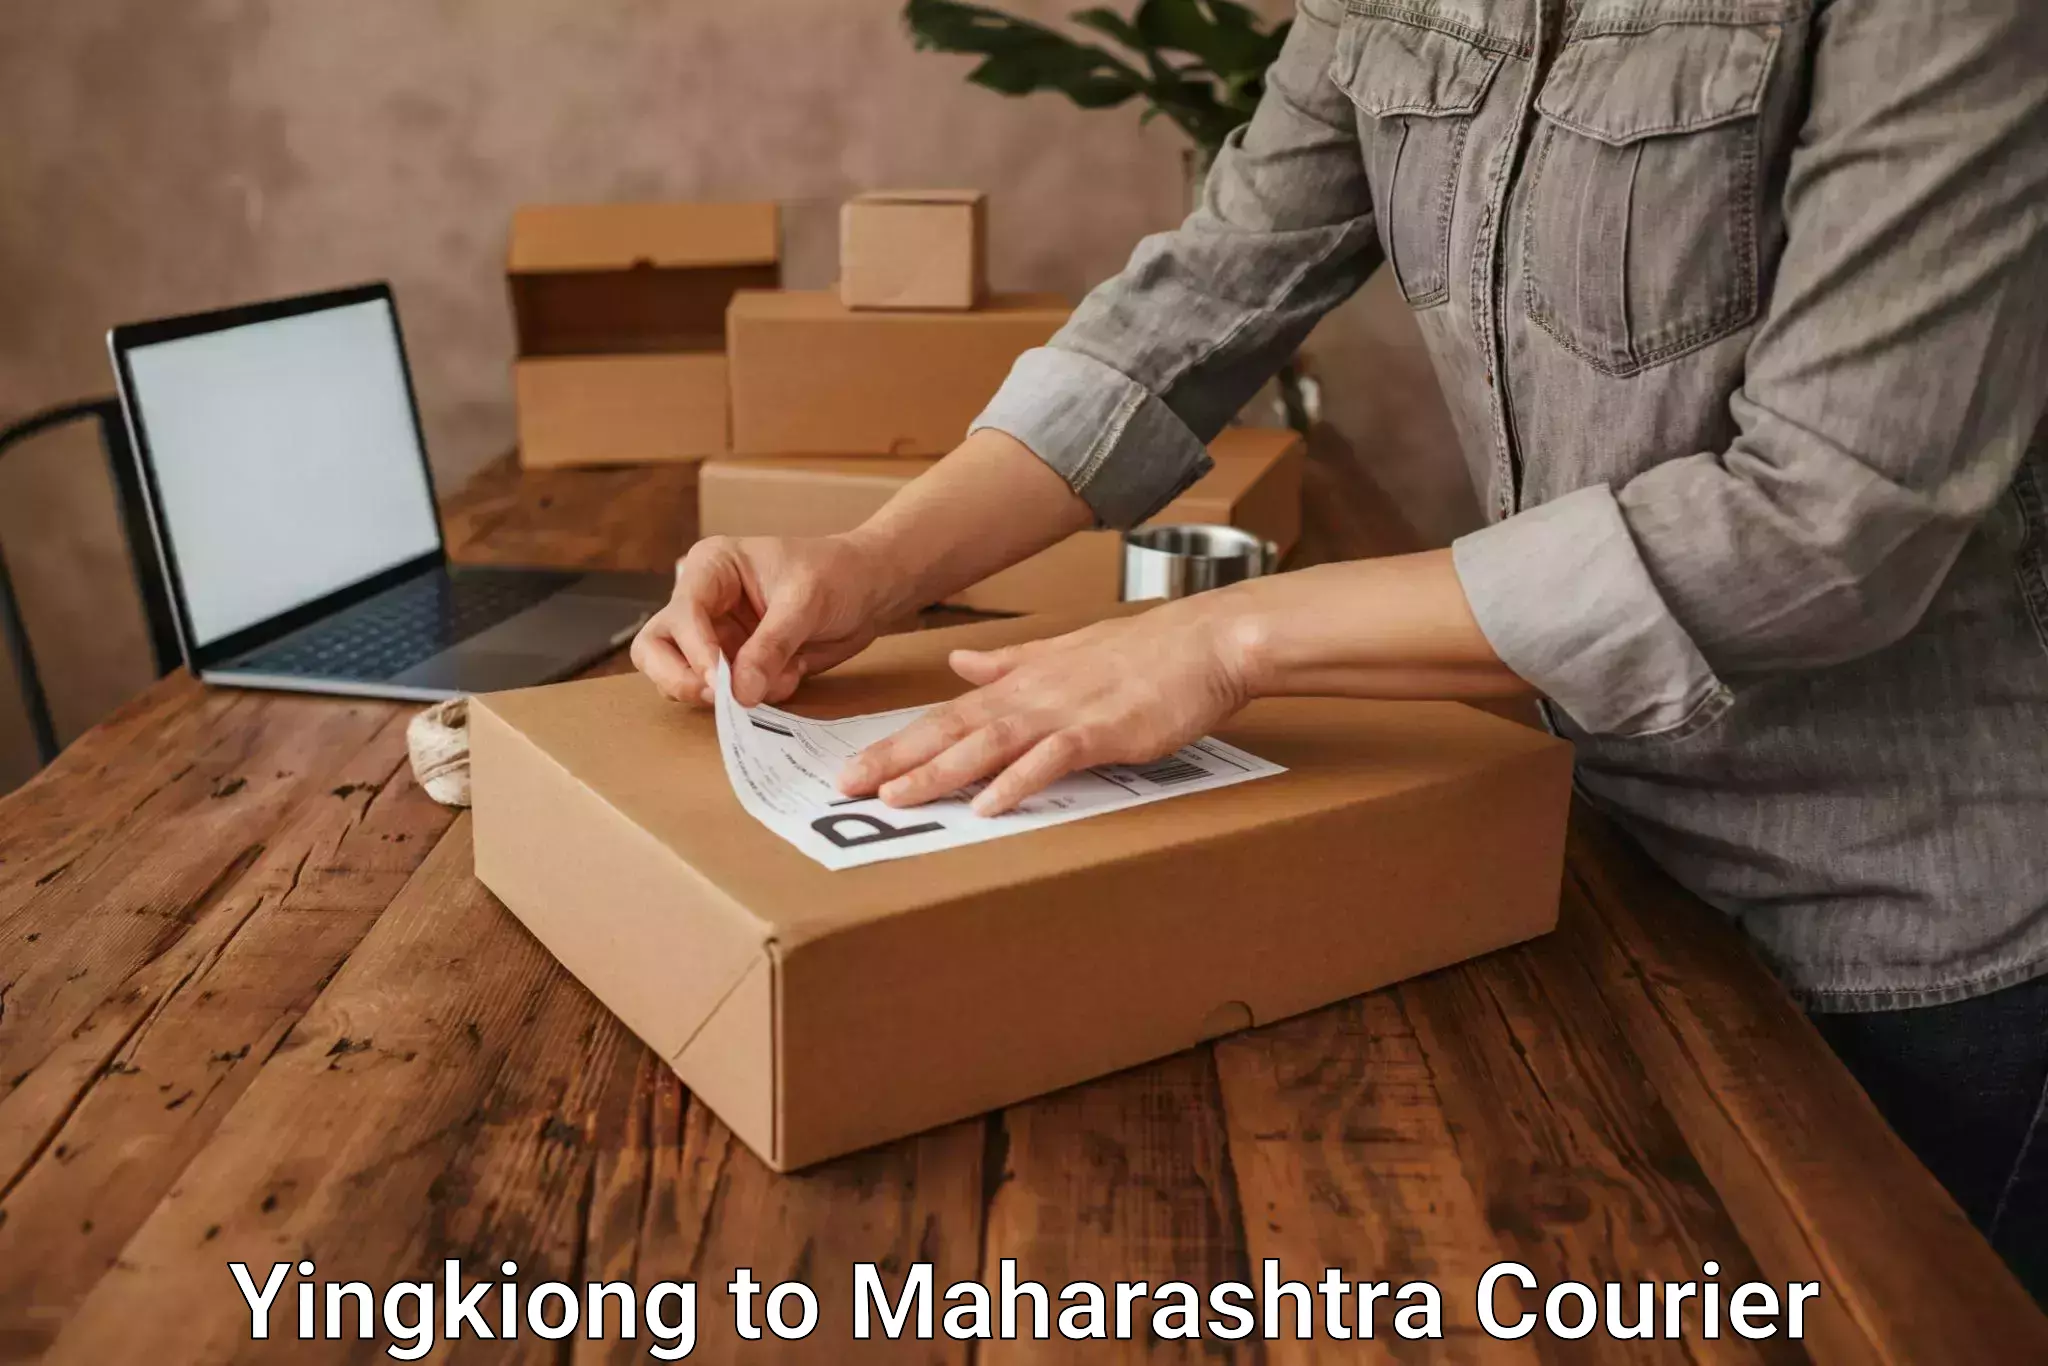 Speedy delivery service Yingkiong to Mahim